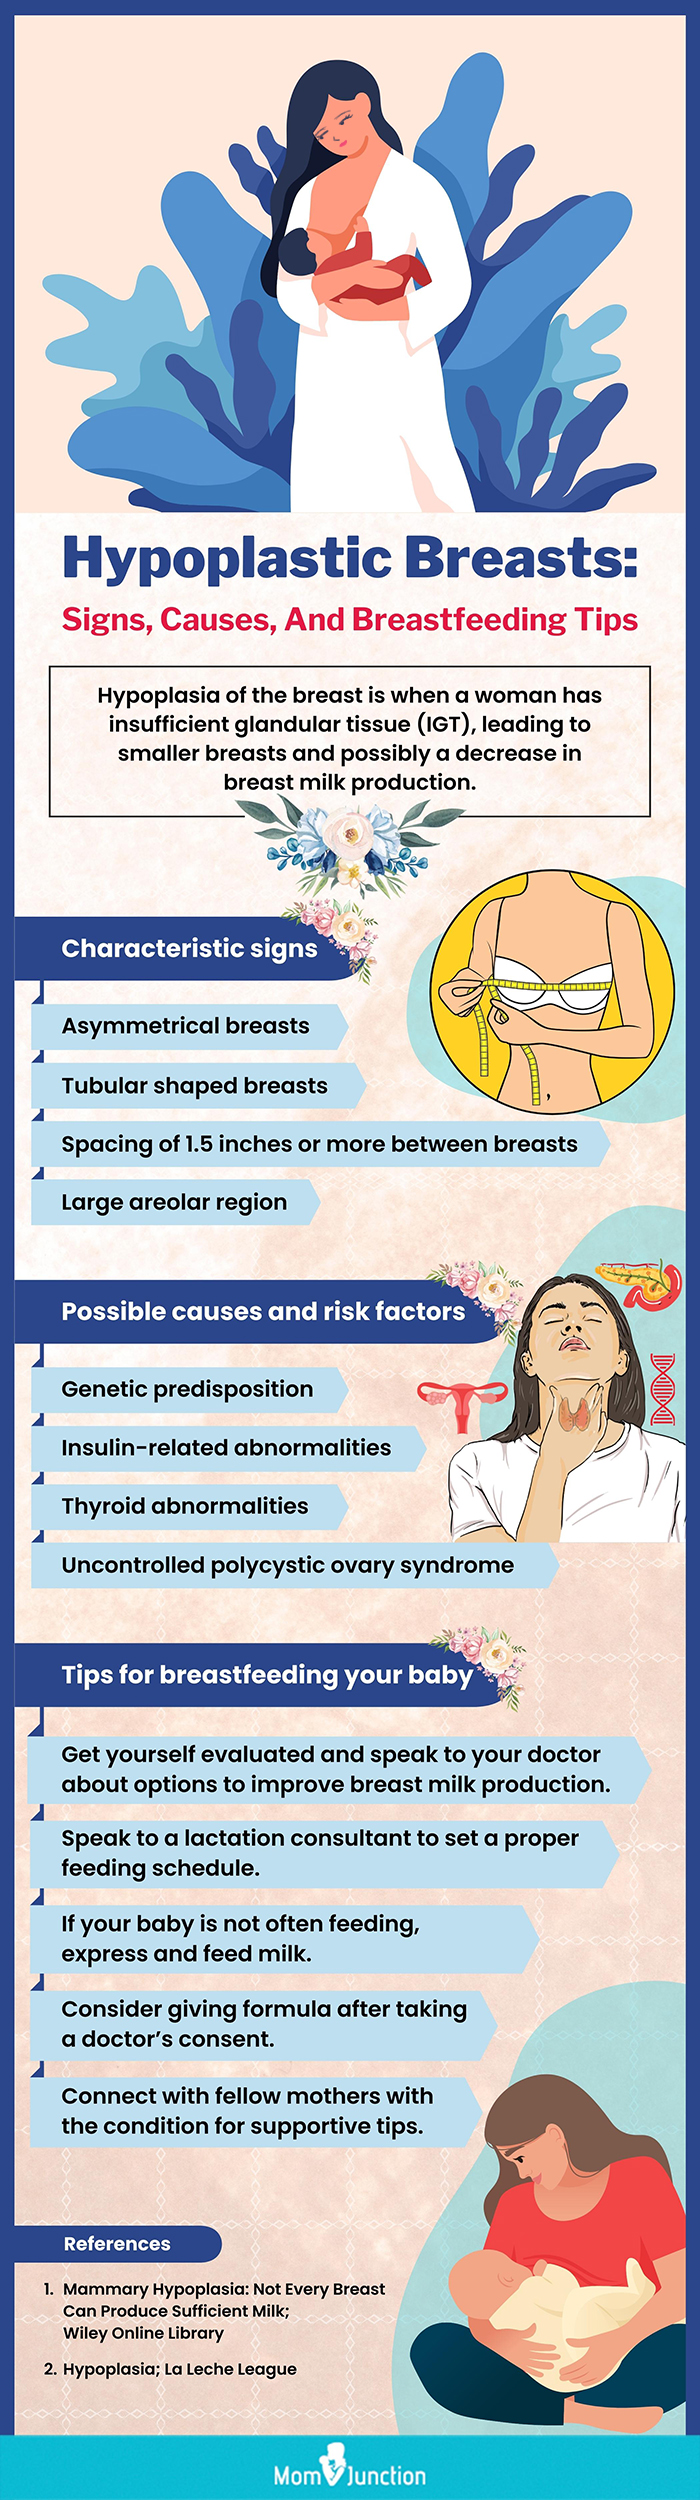 https://cdn2.momjunction.com/wp-content/uploads/2021/05/Hypoplastic-Breasts-Signs-Causes-And-Breastfeeding-Tips.jpg